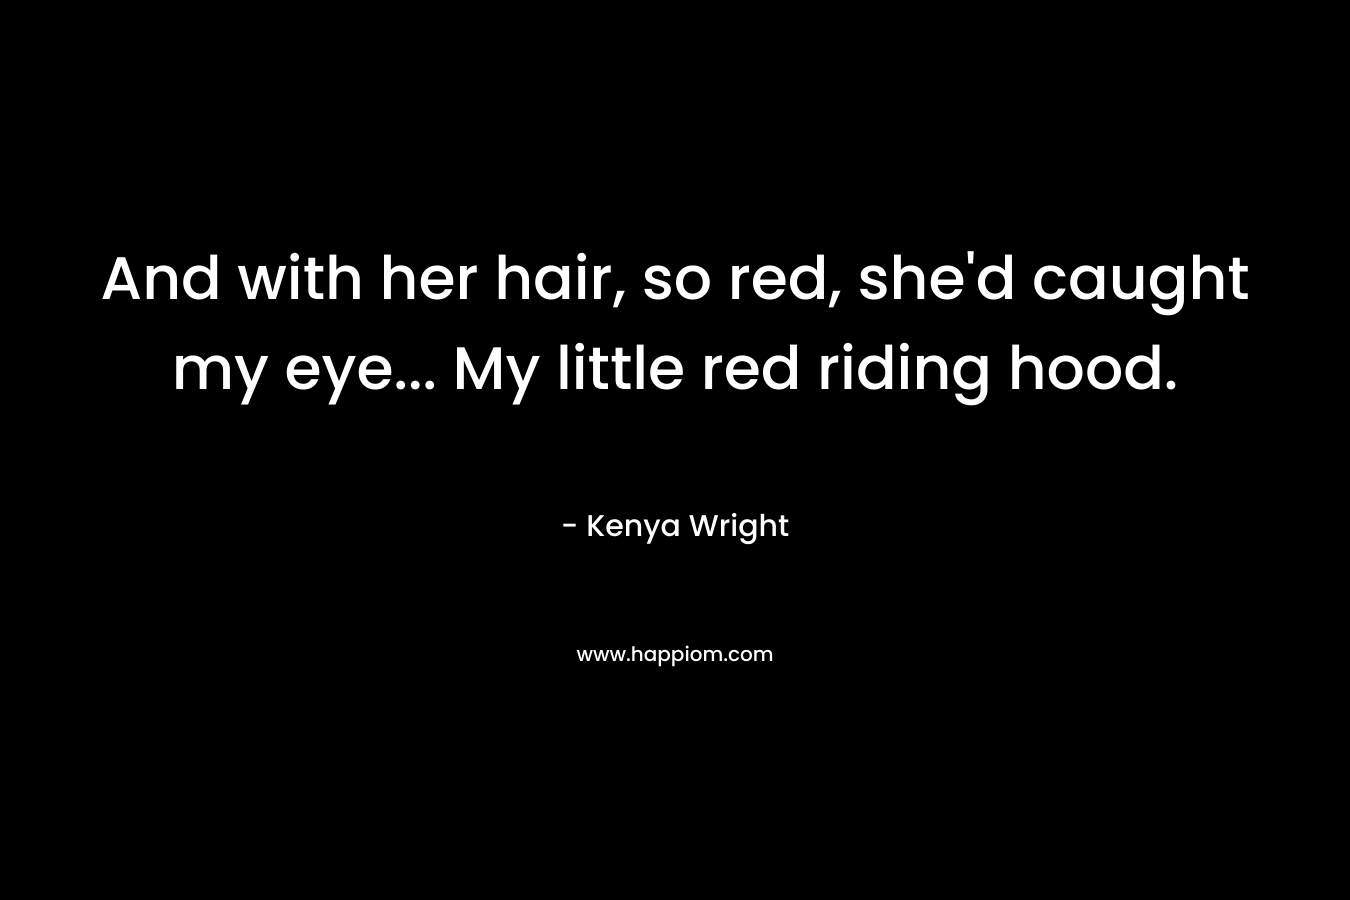 And with her hair, so red, she'd caught my eye... My little red riding hood.